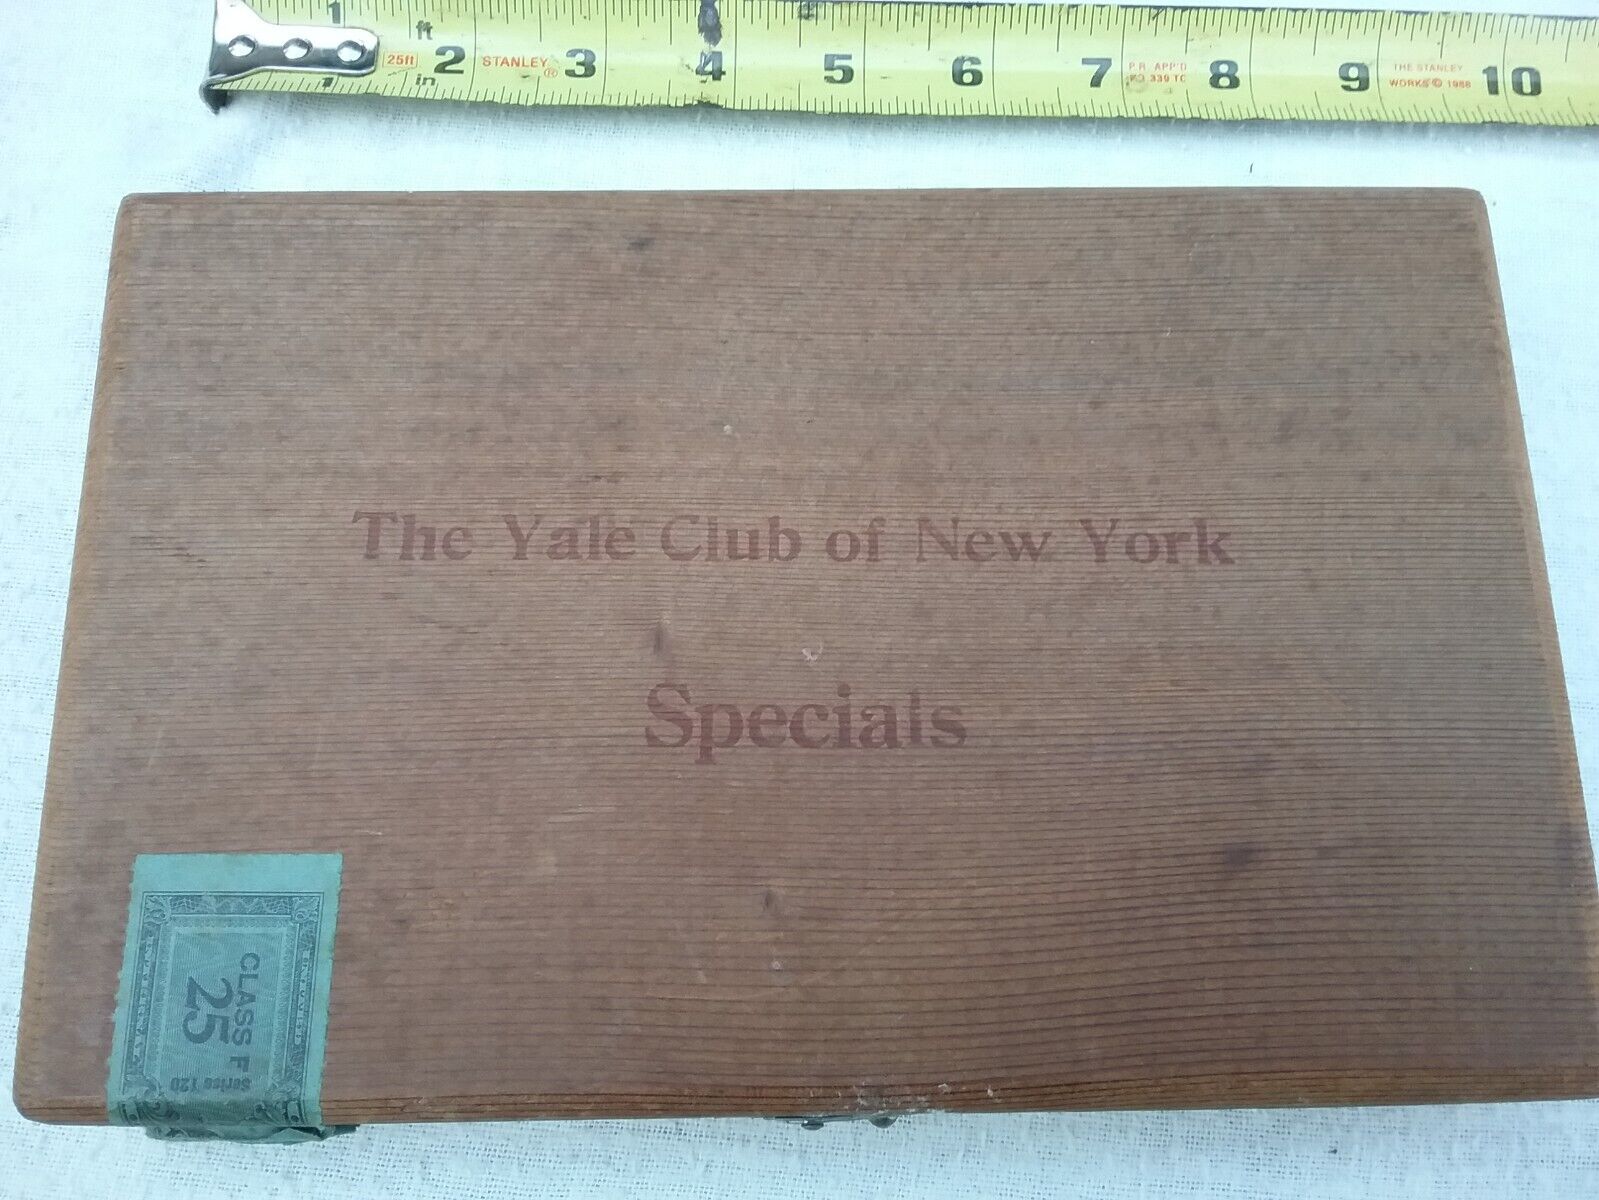 The Yale Club of New York Specials Cigar Box 6 x 9 inches. Very Good Condition